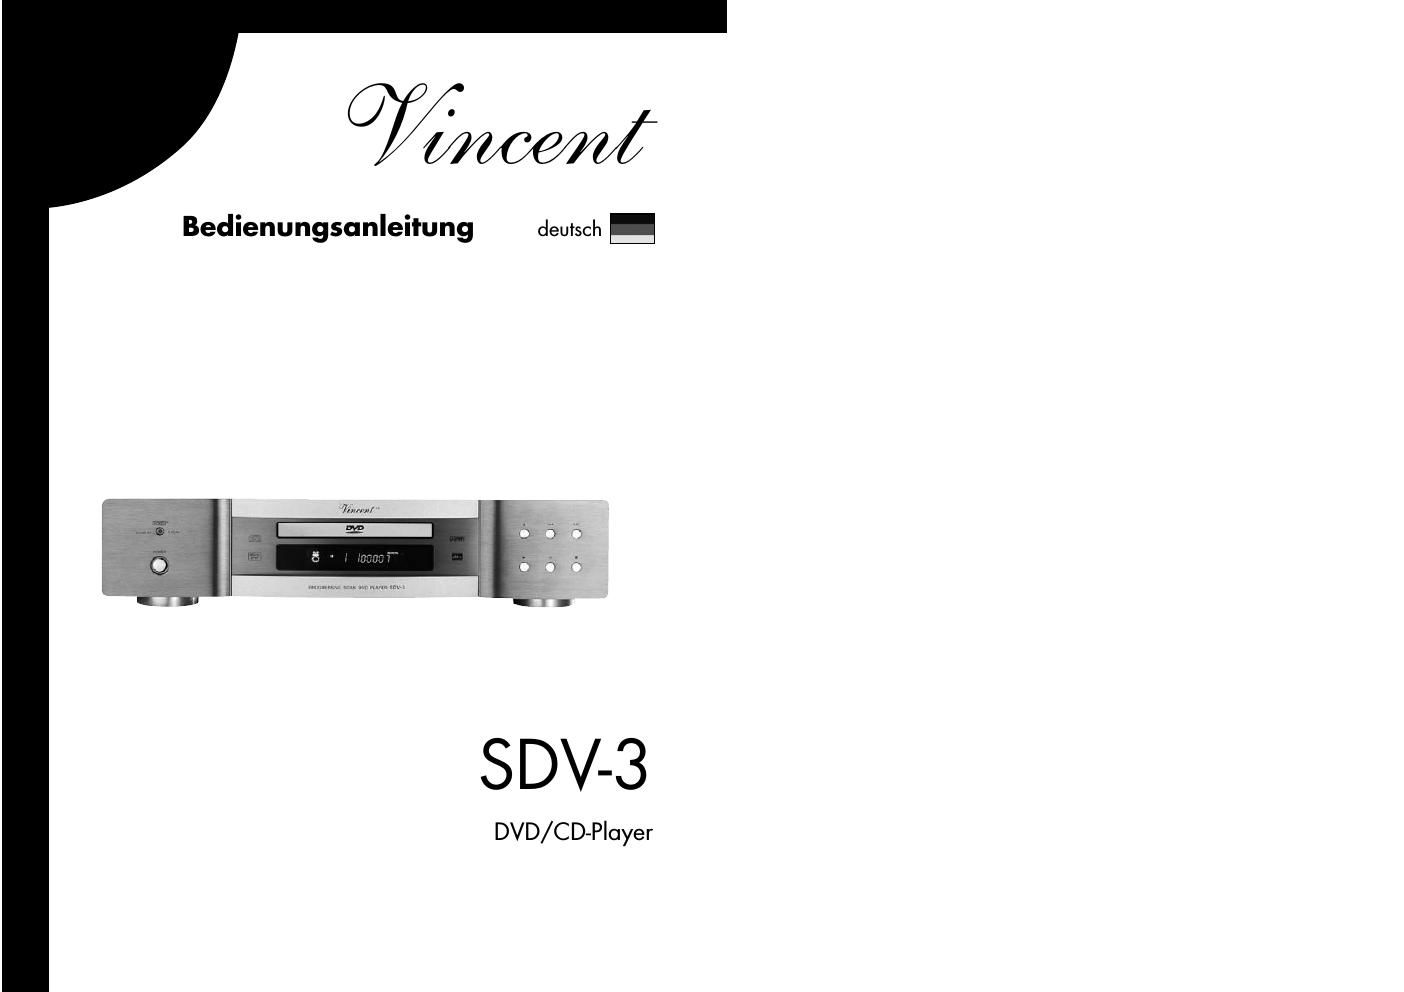 vincent savc 3 owners manual